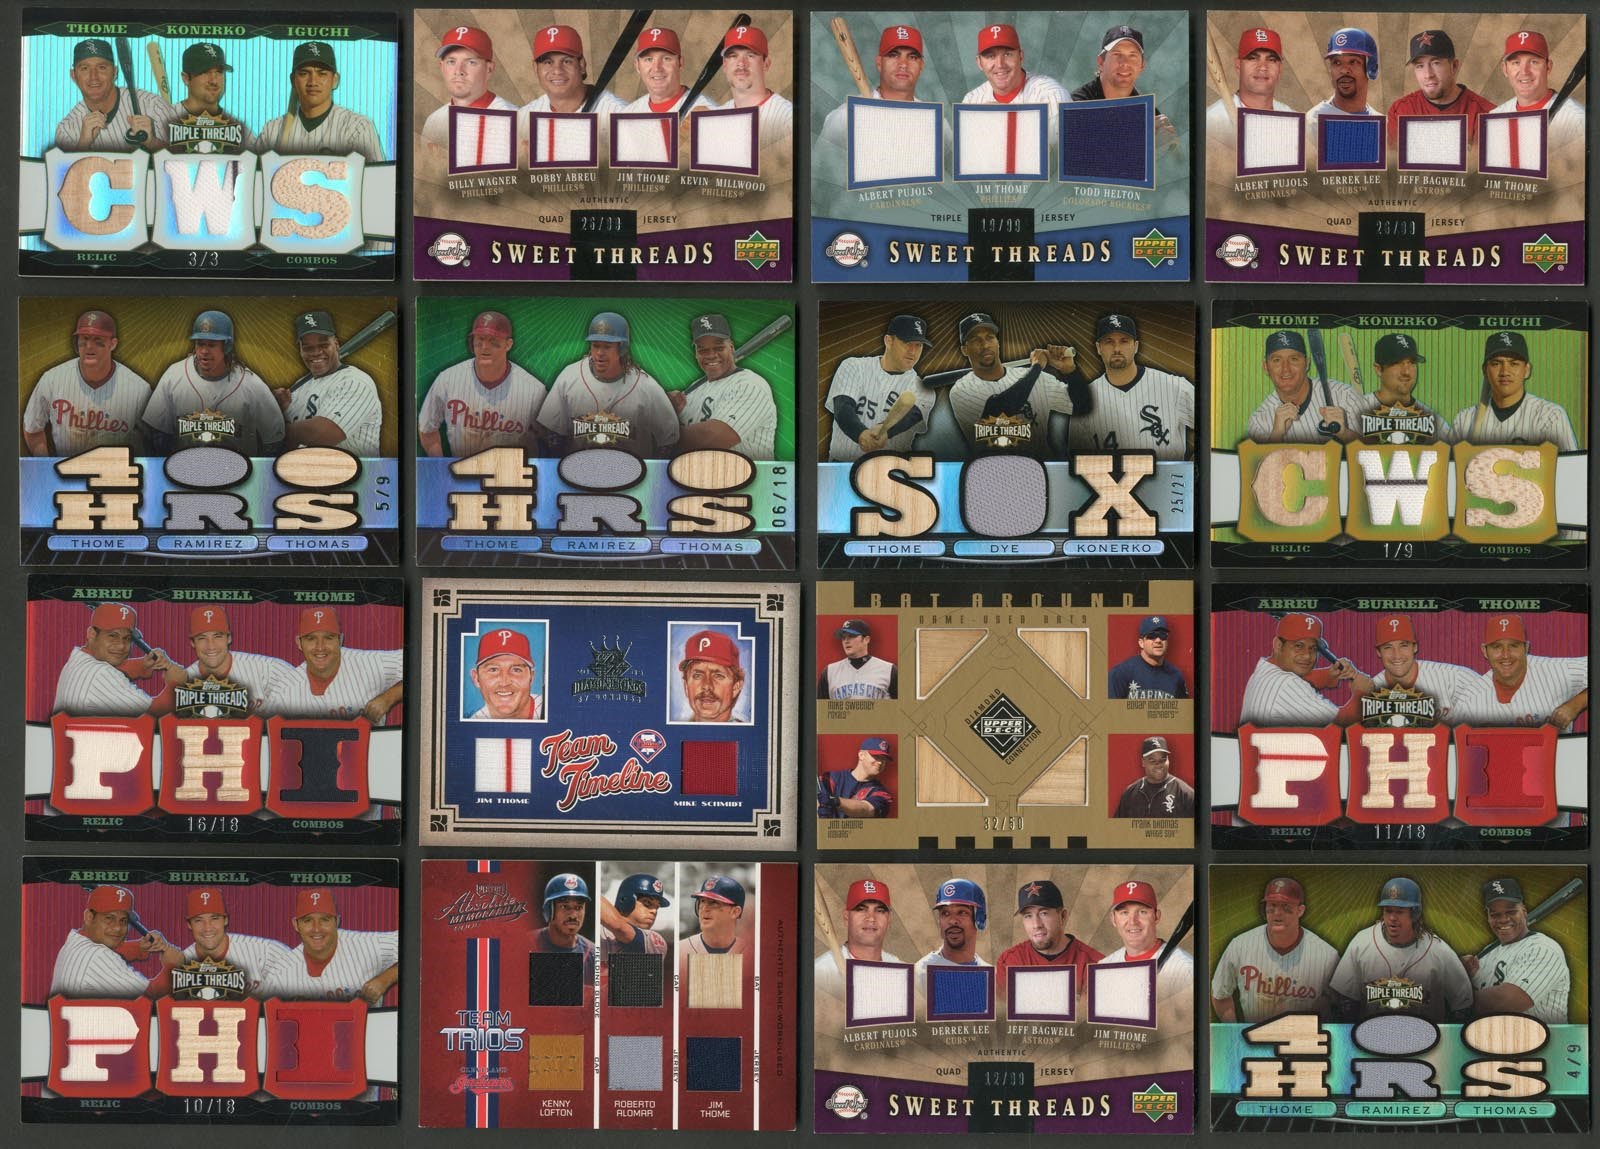 Jim Thome Master Collection - Large Modern Insert Multi-Game Used Memorabilia Collection feat. Jim Thome (200+)